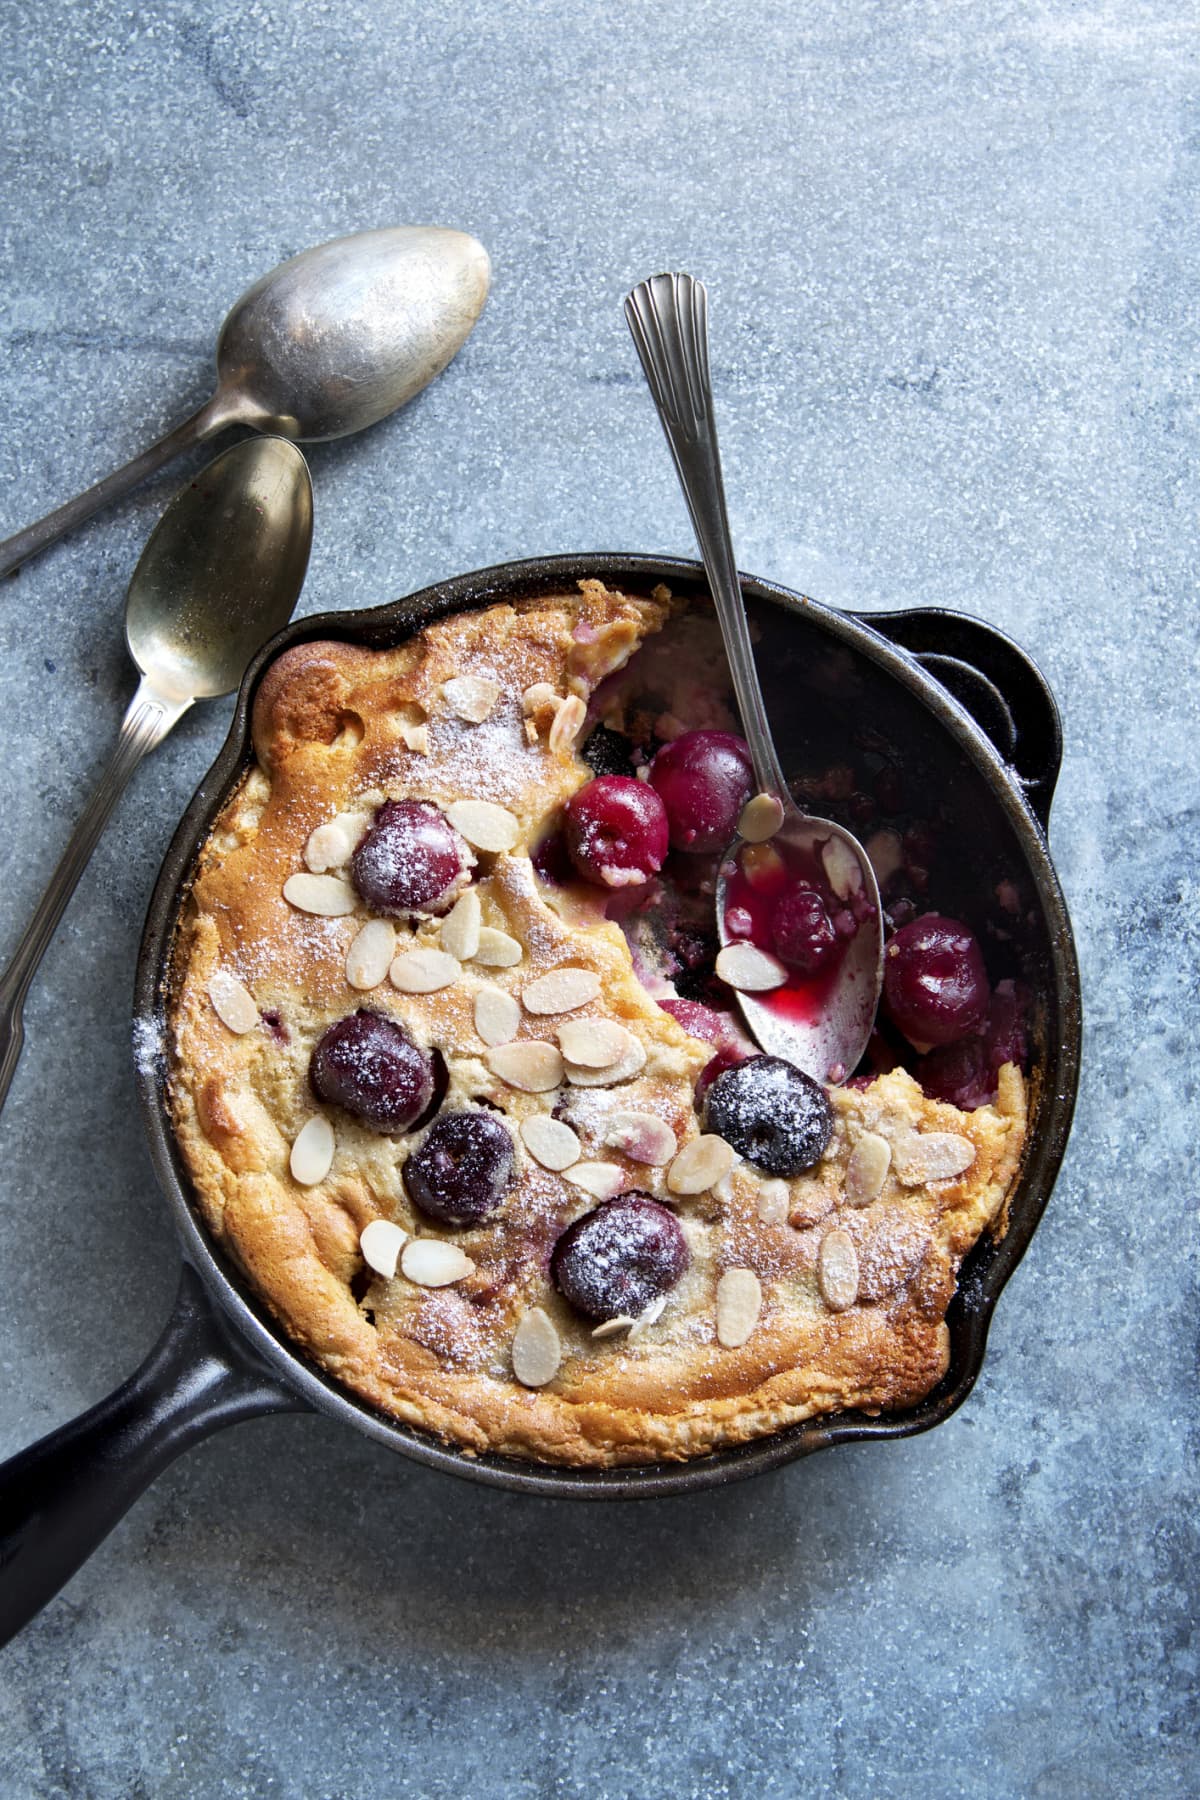 Cherries clafoutis with a spoon.